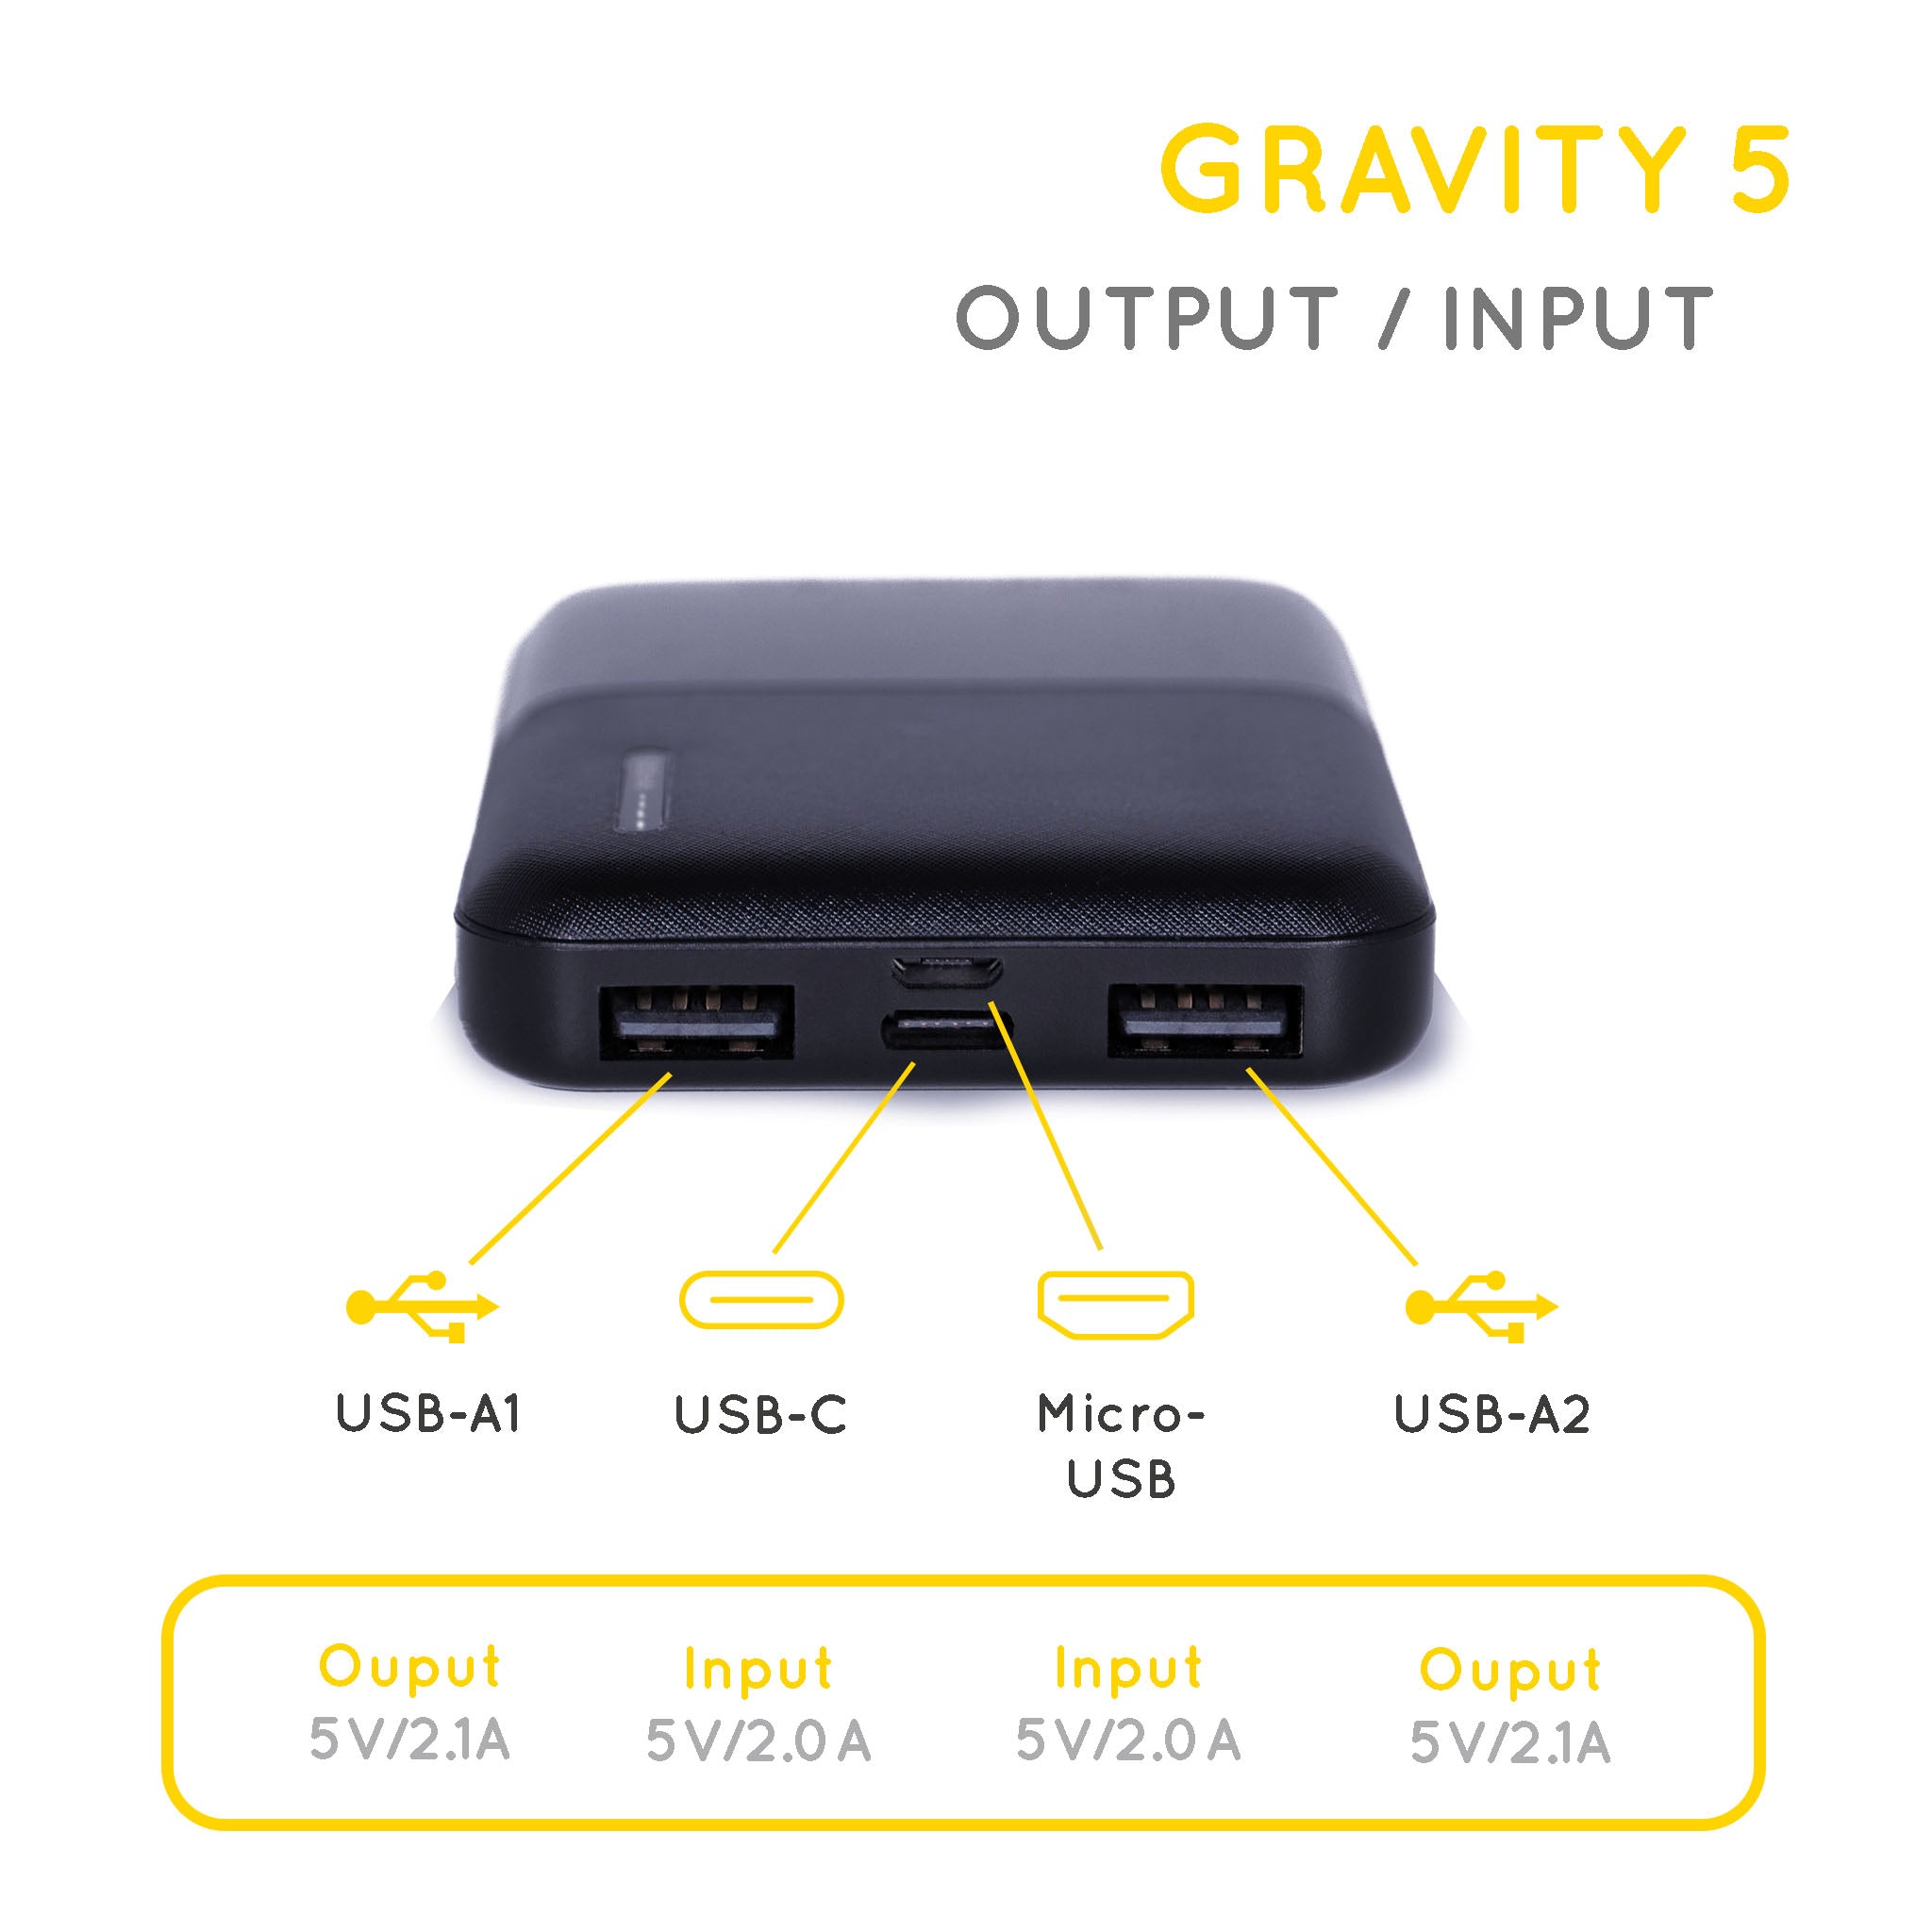 Power bank explanation for the output and input: 2 USB-A, 1 Micro-USB, 1 USB-C 